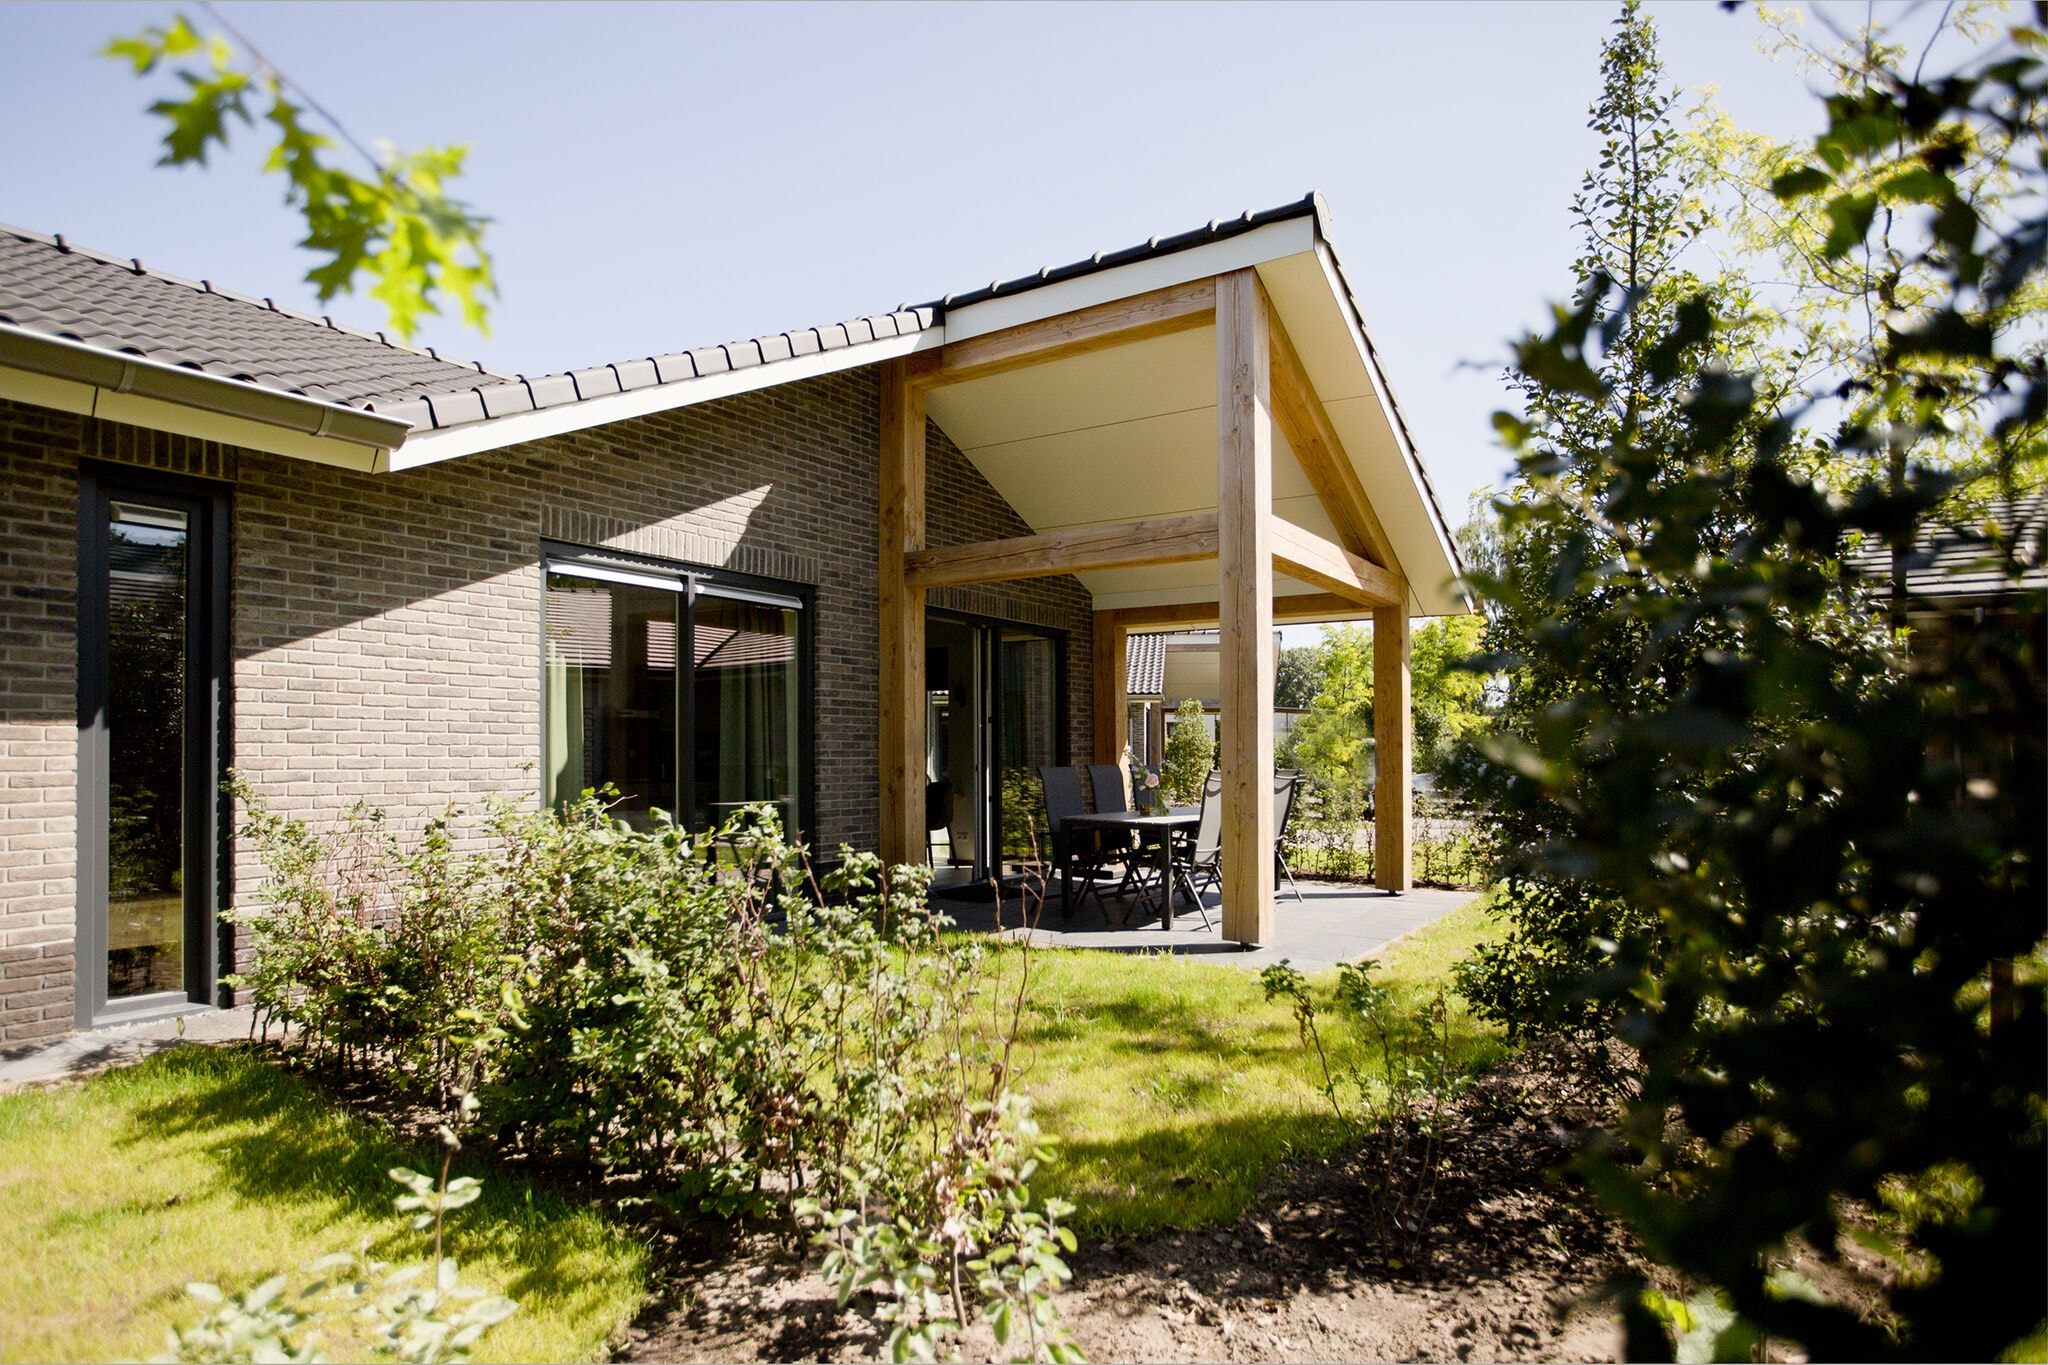 Attractive bungalow near the Veluwe